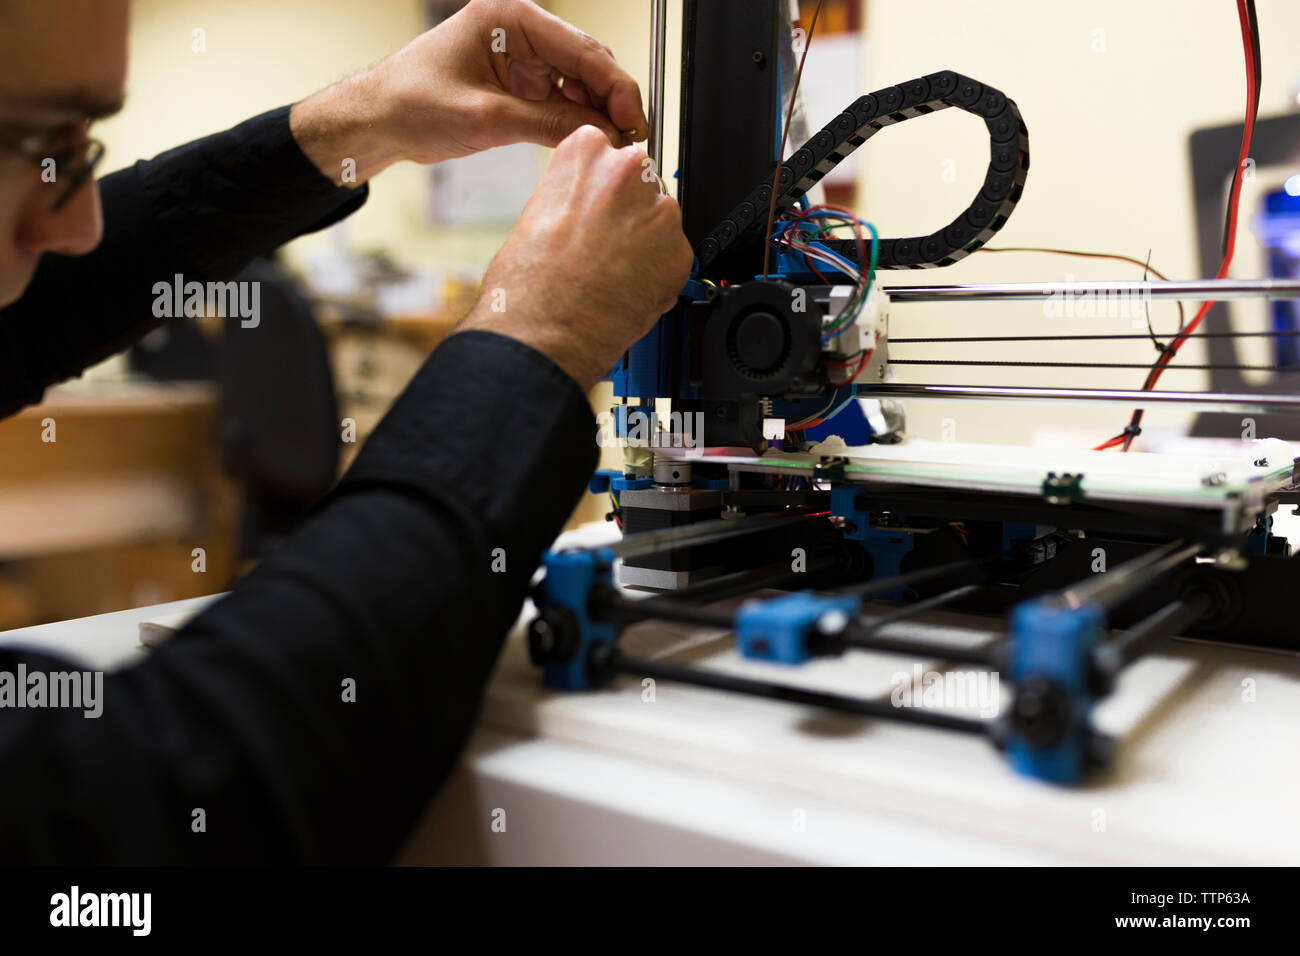 Male engineer fixing 3D printer on table Stock Photo